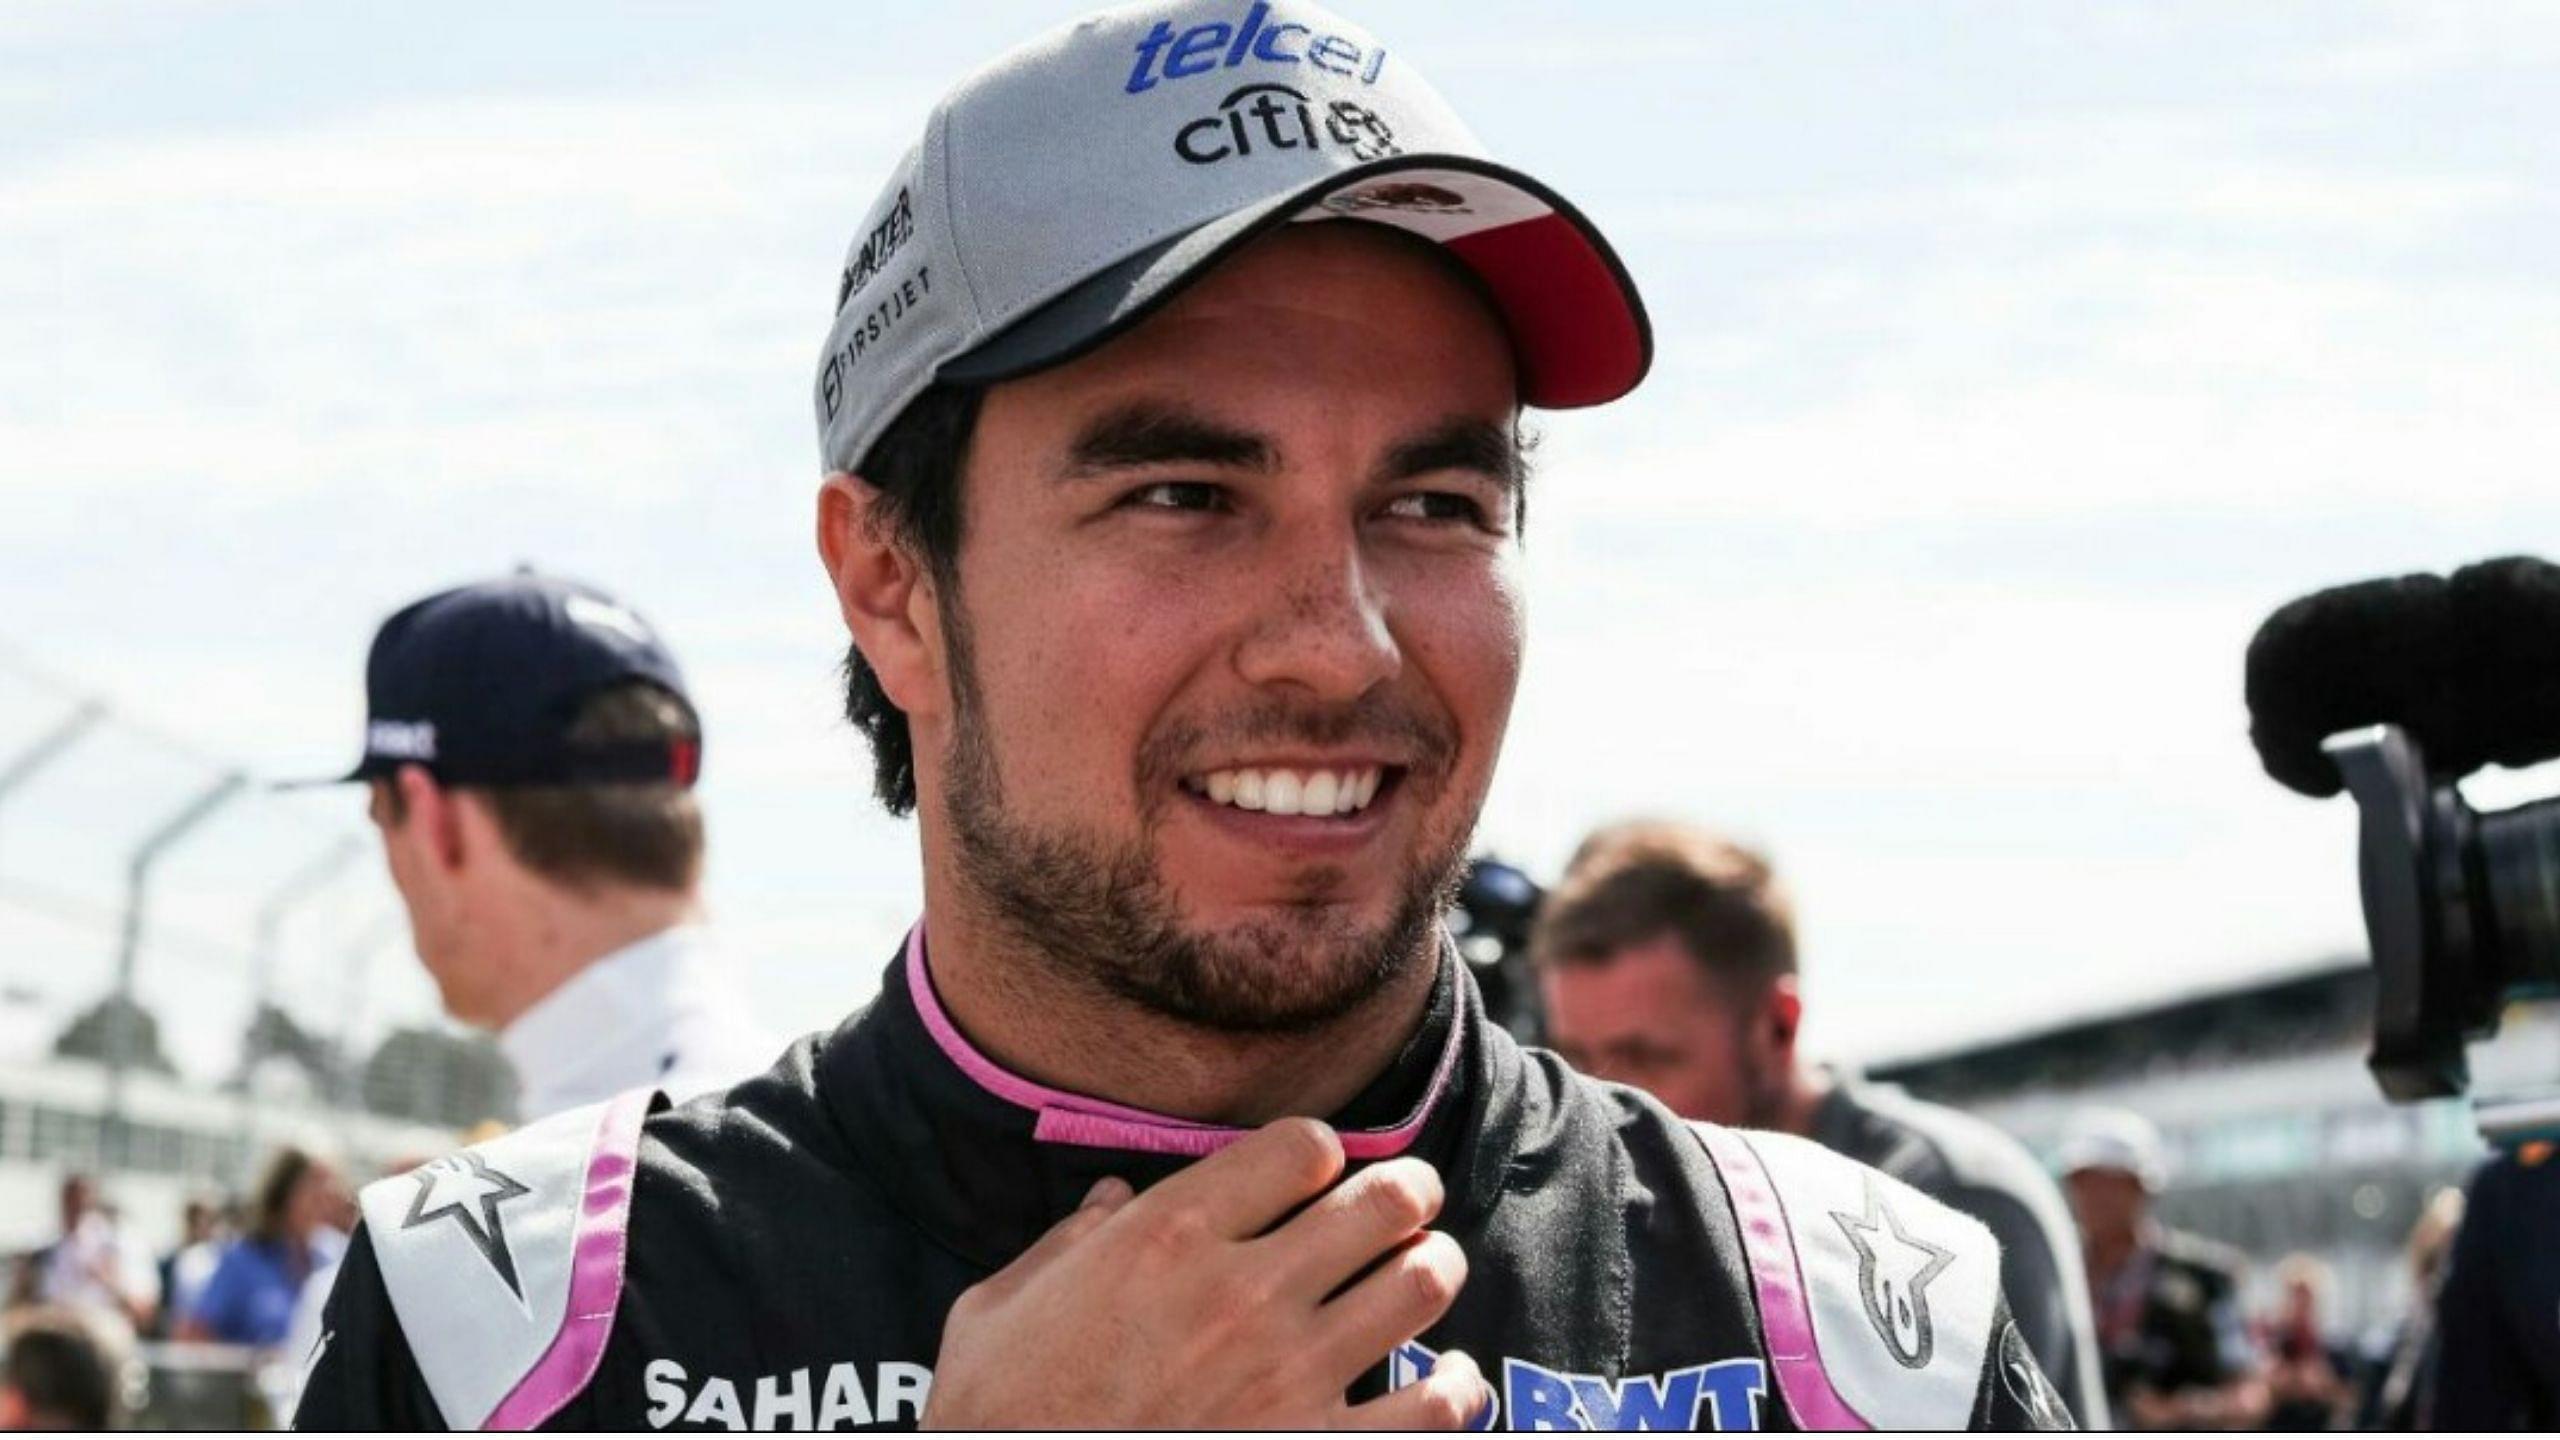 "I have a lot of interest in other stuff away from racing" - Sergio Perez confirms sabbatical if Red Bull stick with Alex Albon